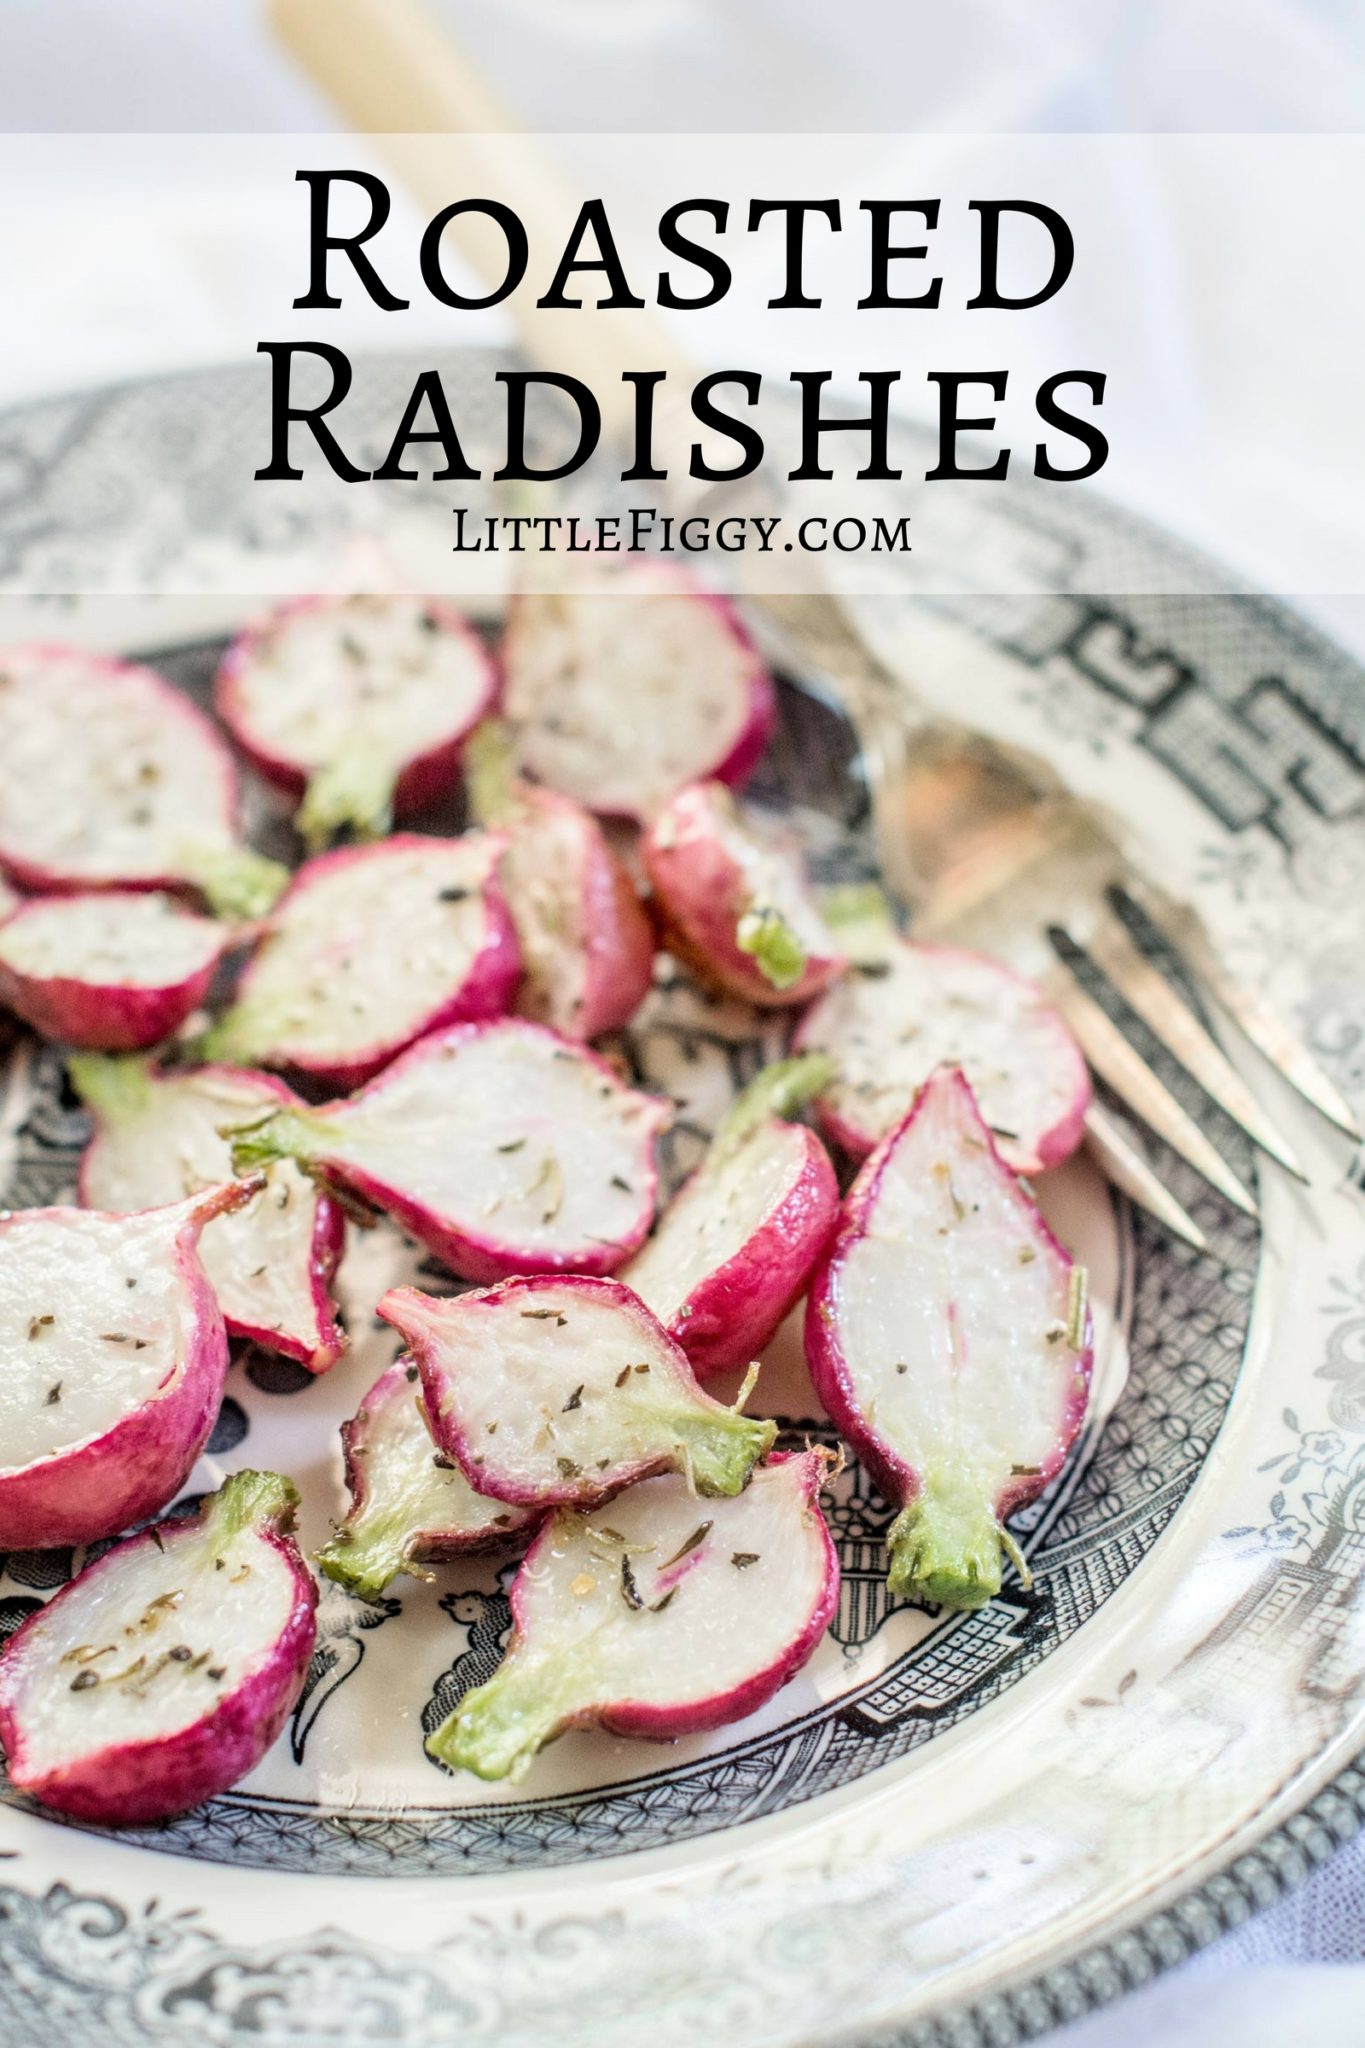 Quick and easy to make, Roasted Radishes are delicious served hot or cold! Get the recipe at Little Figgy Food.